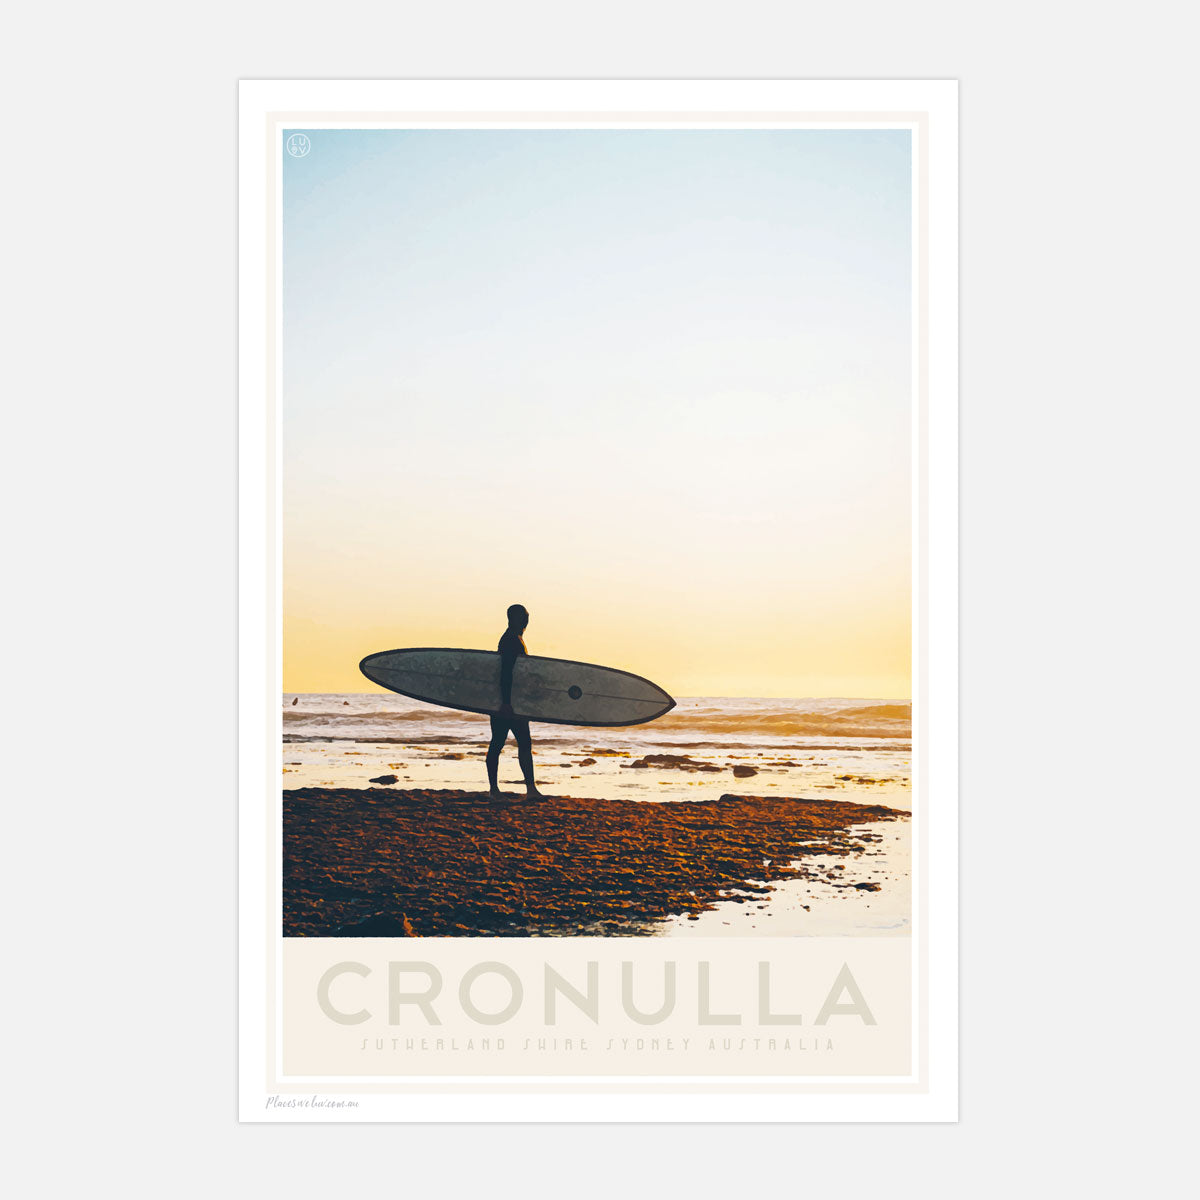 Cronulla beach vintage travel style poster by places we luv